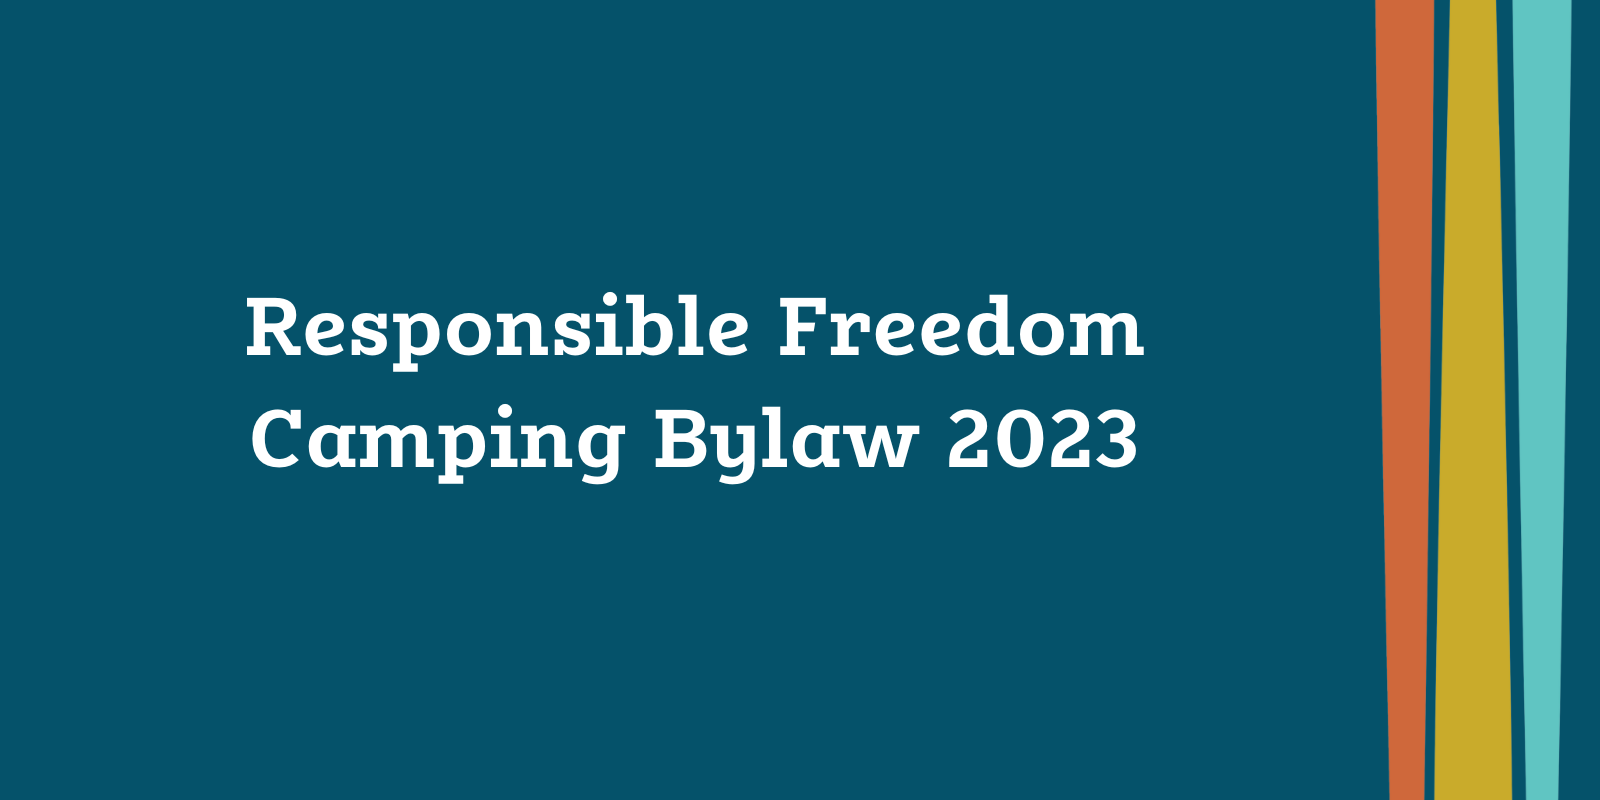 Responsible Freedom Camping Bylaw 2023 banner image